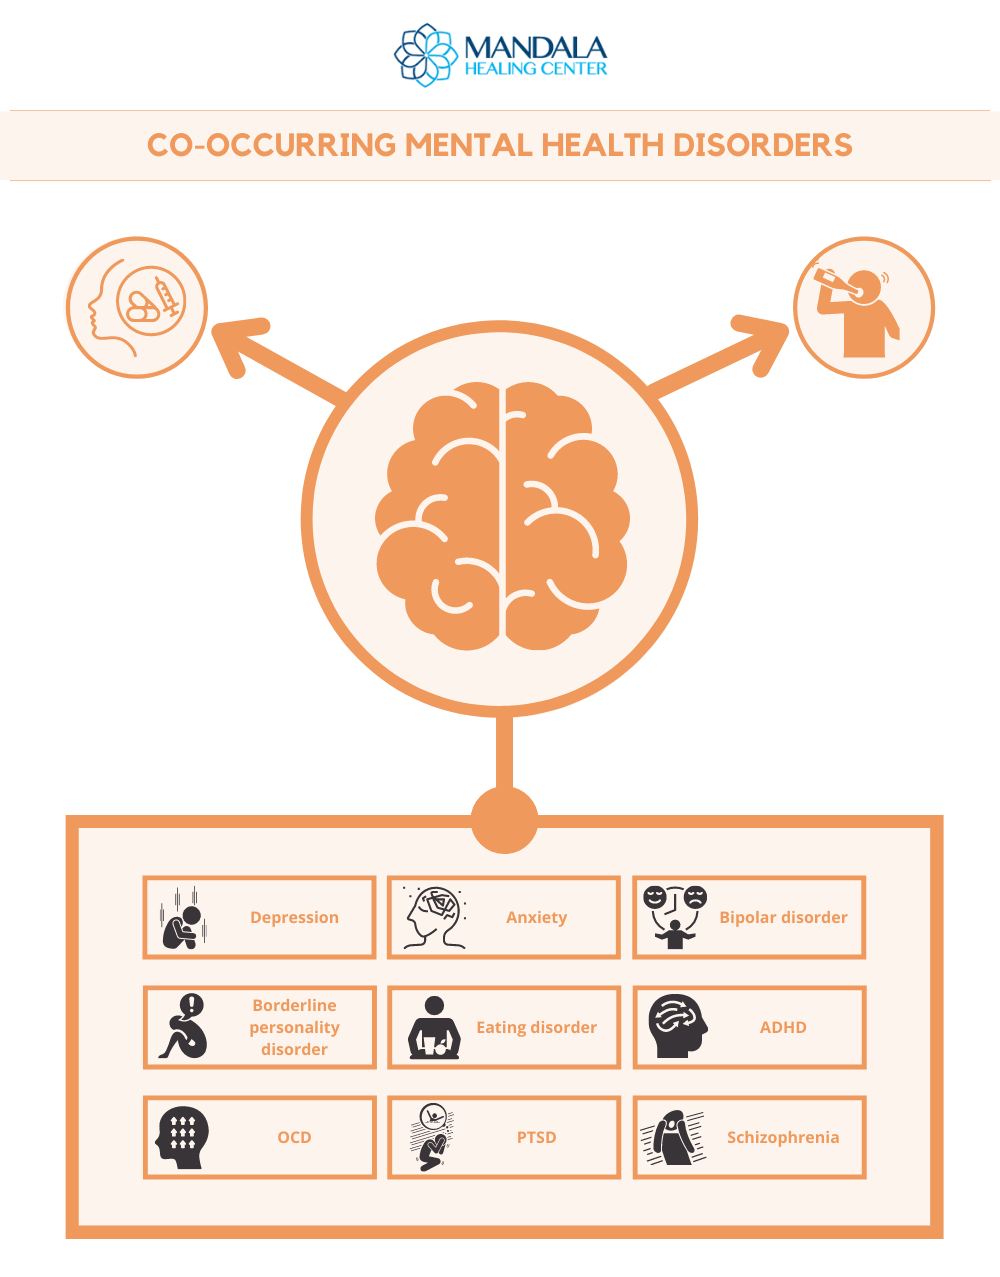 co-occurring mental health disorders